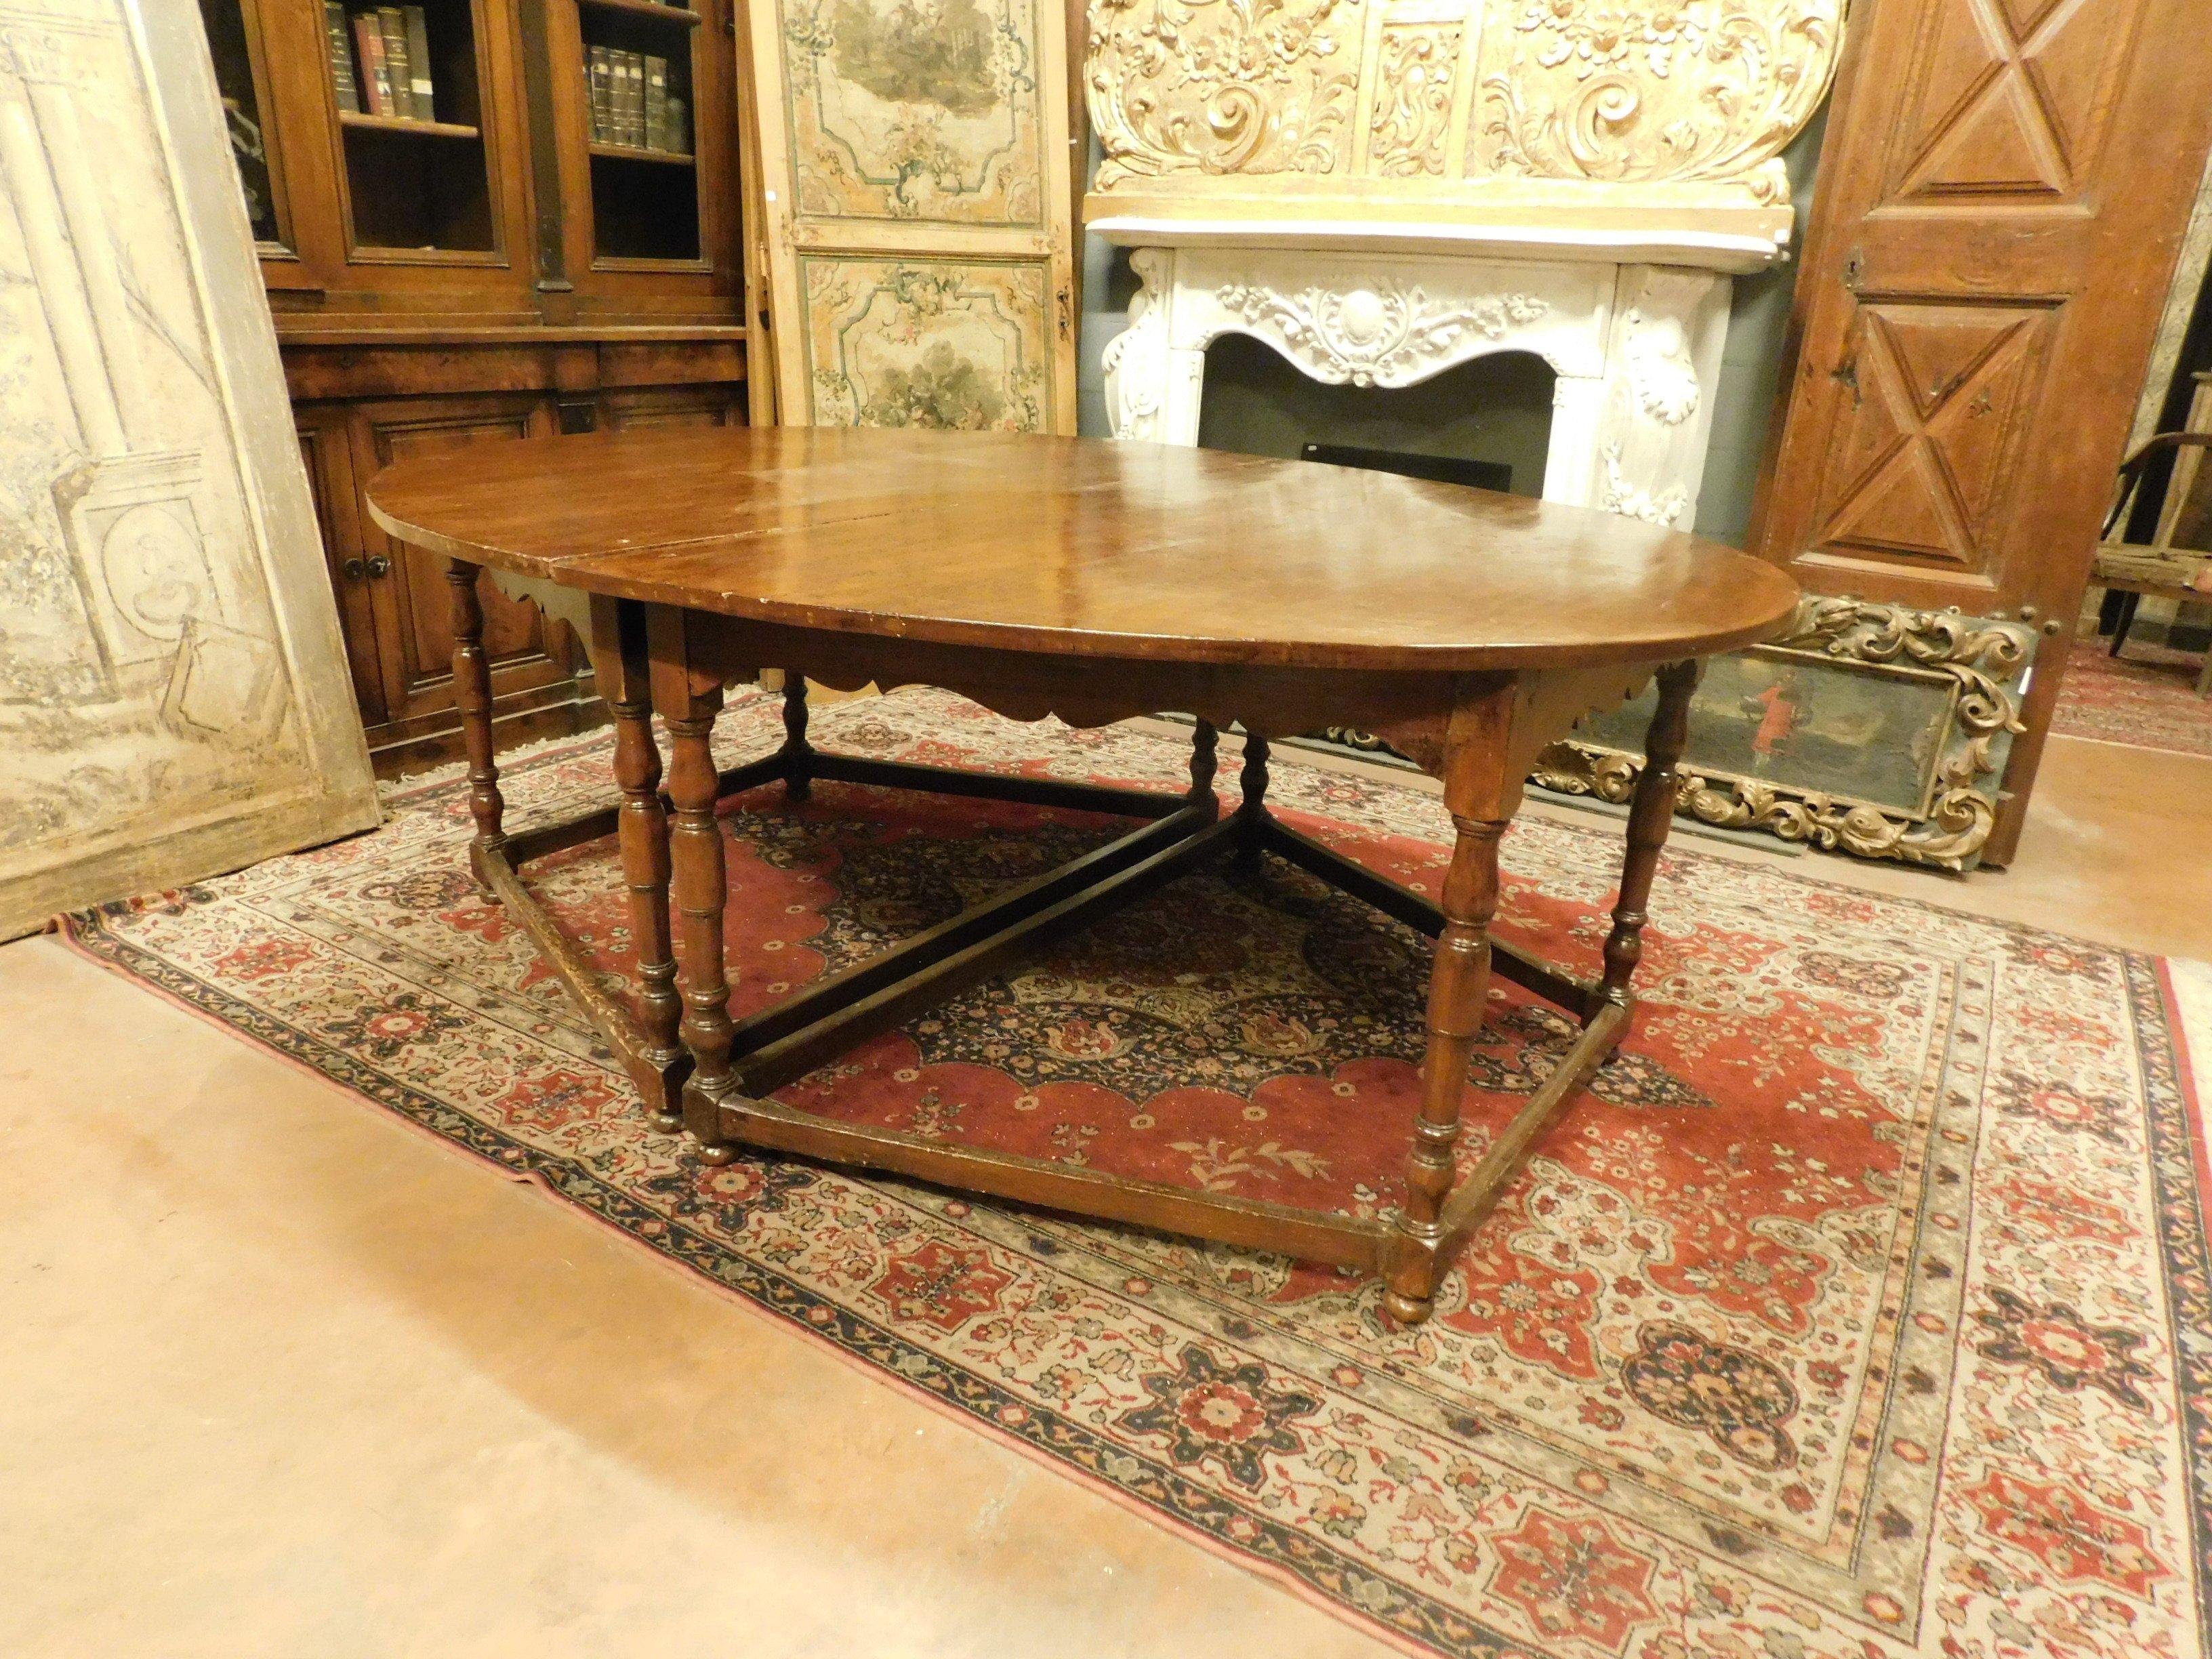 Very ancient oval table in precious beechwood, it is composed of 2 parts, divisible into 2 half-moons and with 8 legs carved by hand with motifs of the time, handmade in the 17th century, for a noble palace in Italy.
It can be used in many ways, as